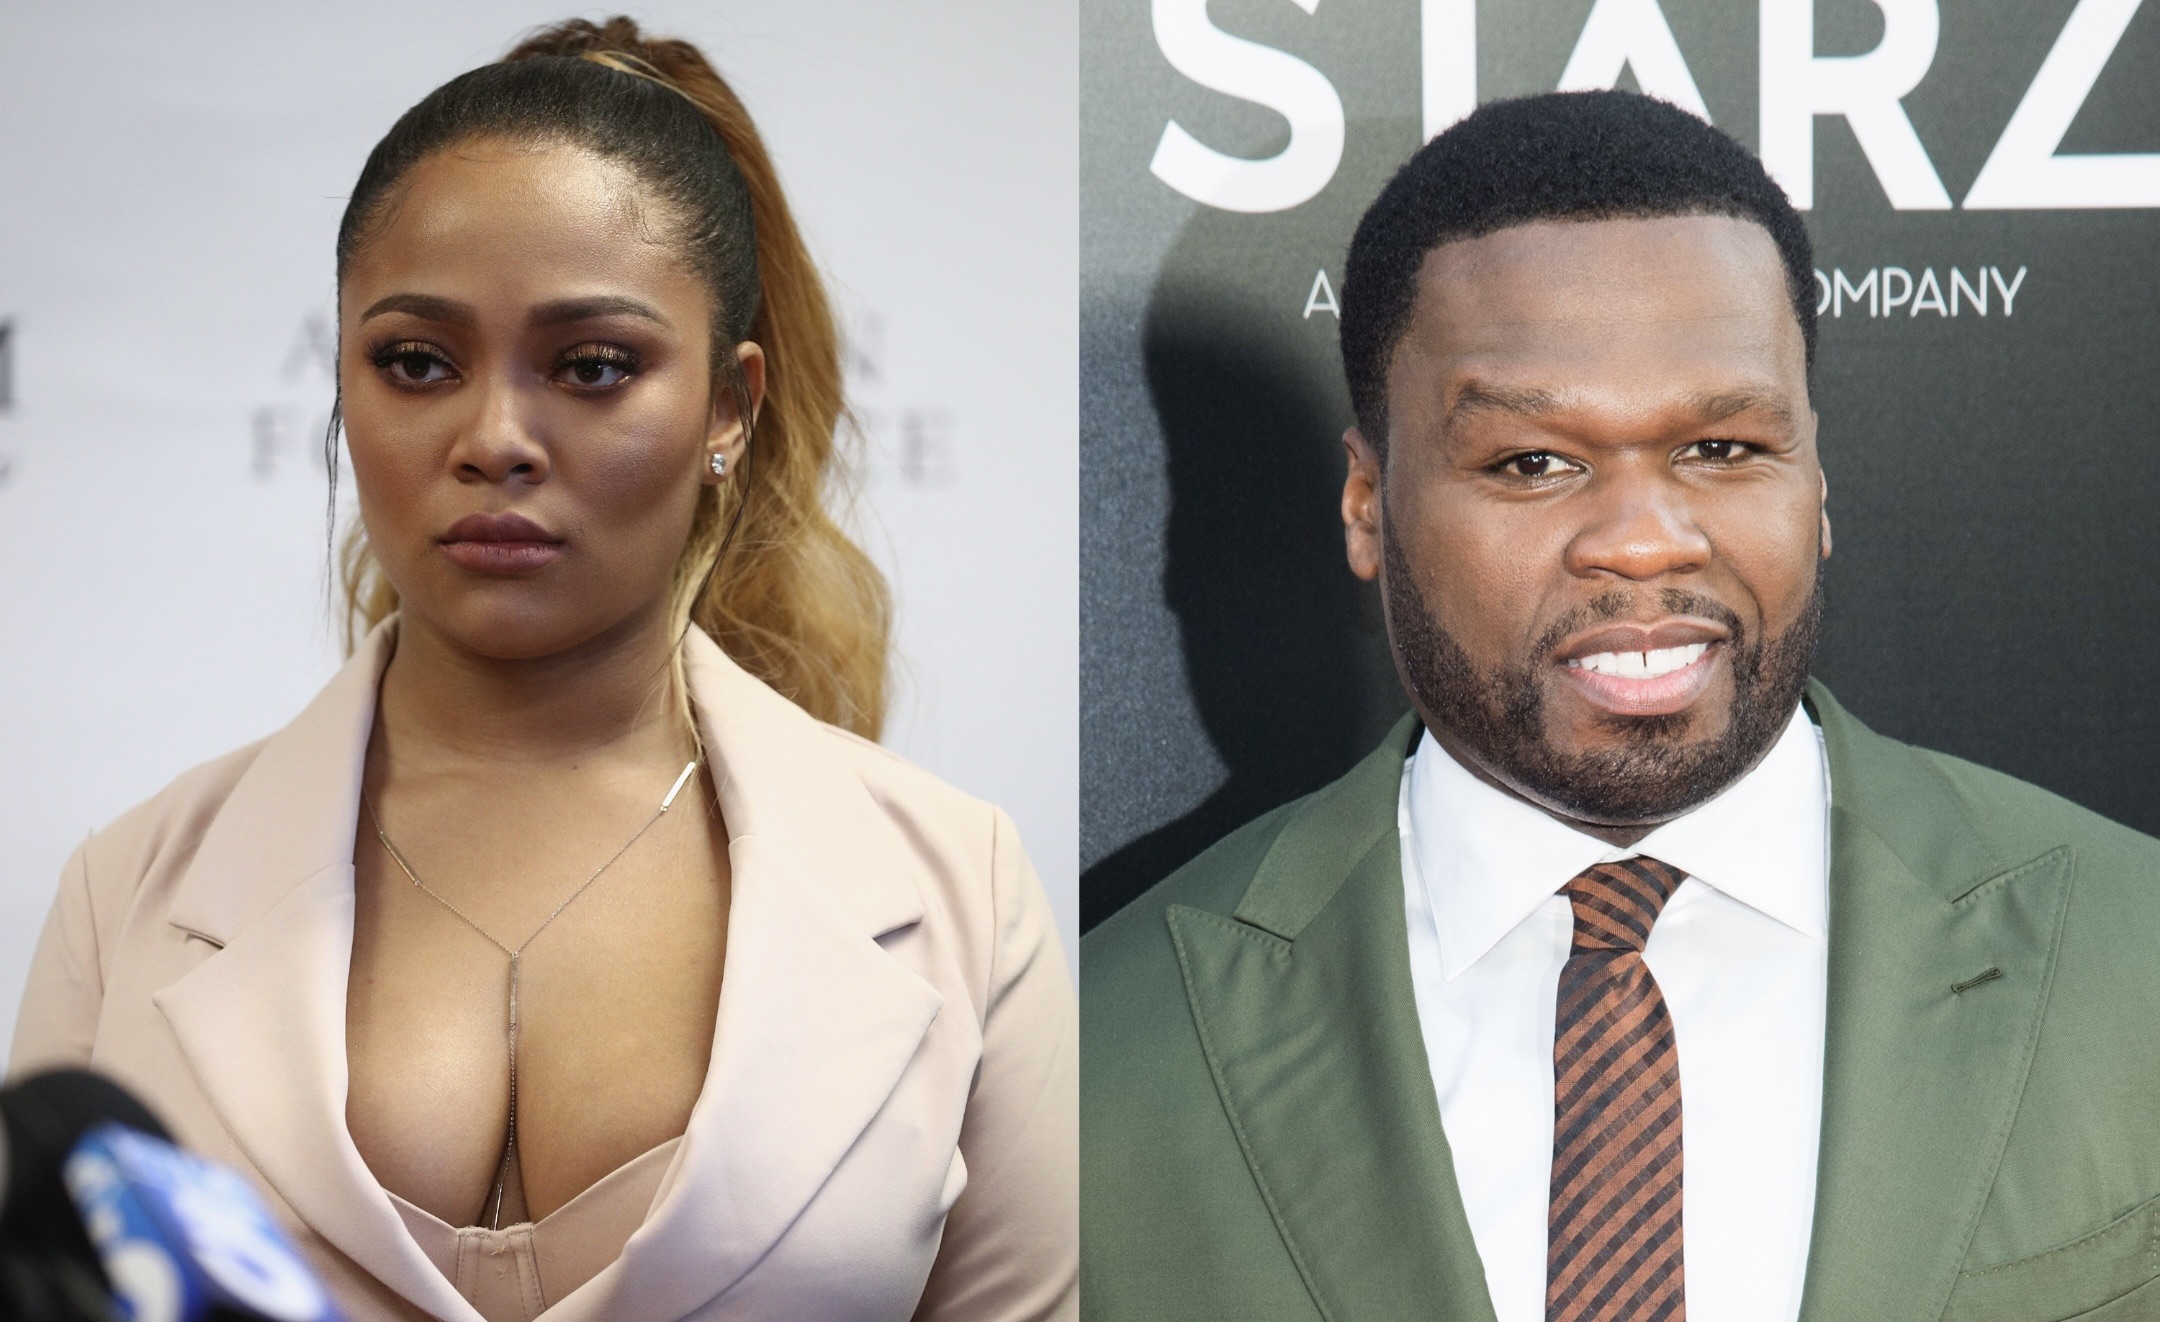 Still Coming For His Coins: 50 Cent Ramps Up Efforts to Collect $50k Still Owed From ‘Love & Hip Hop’ Star Teairra Mari